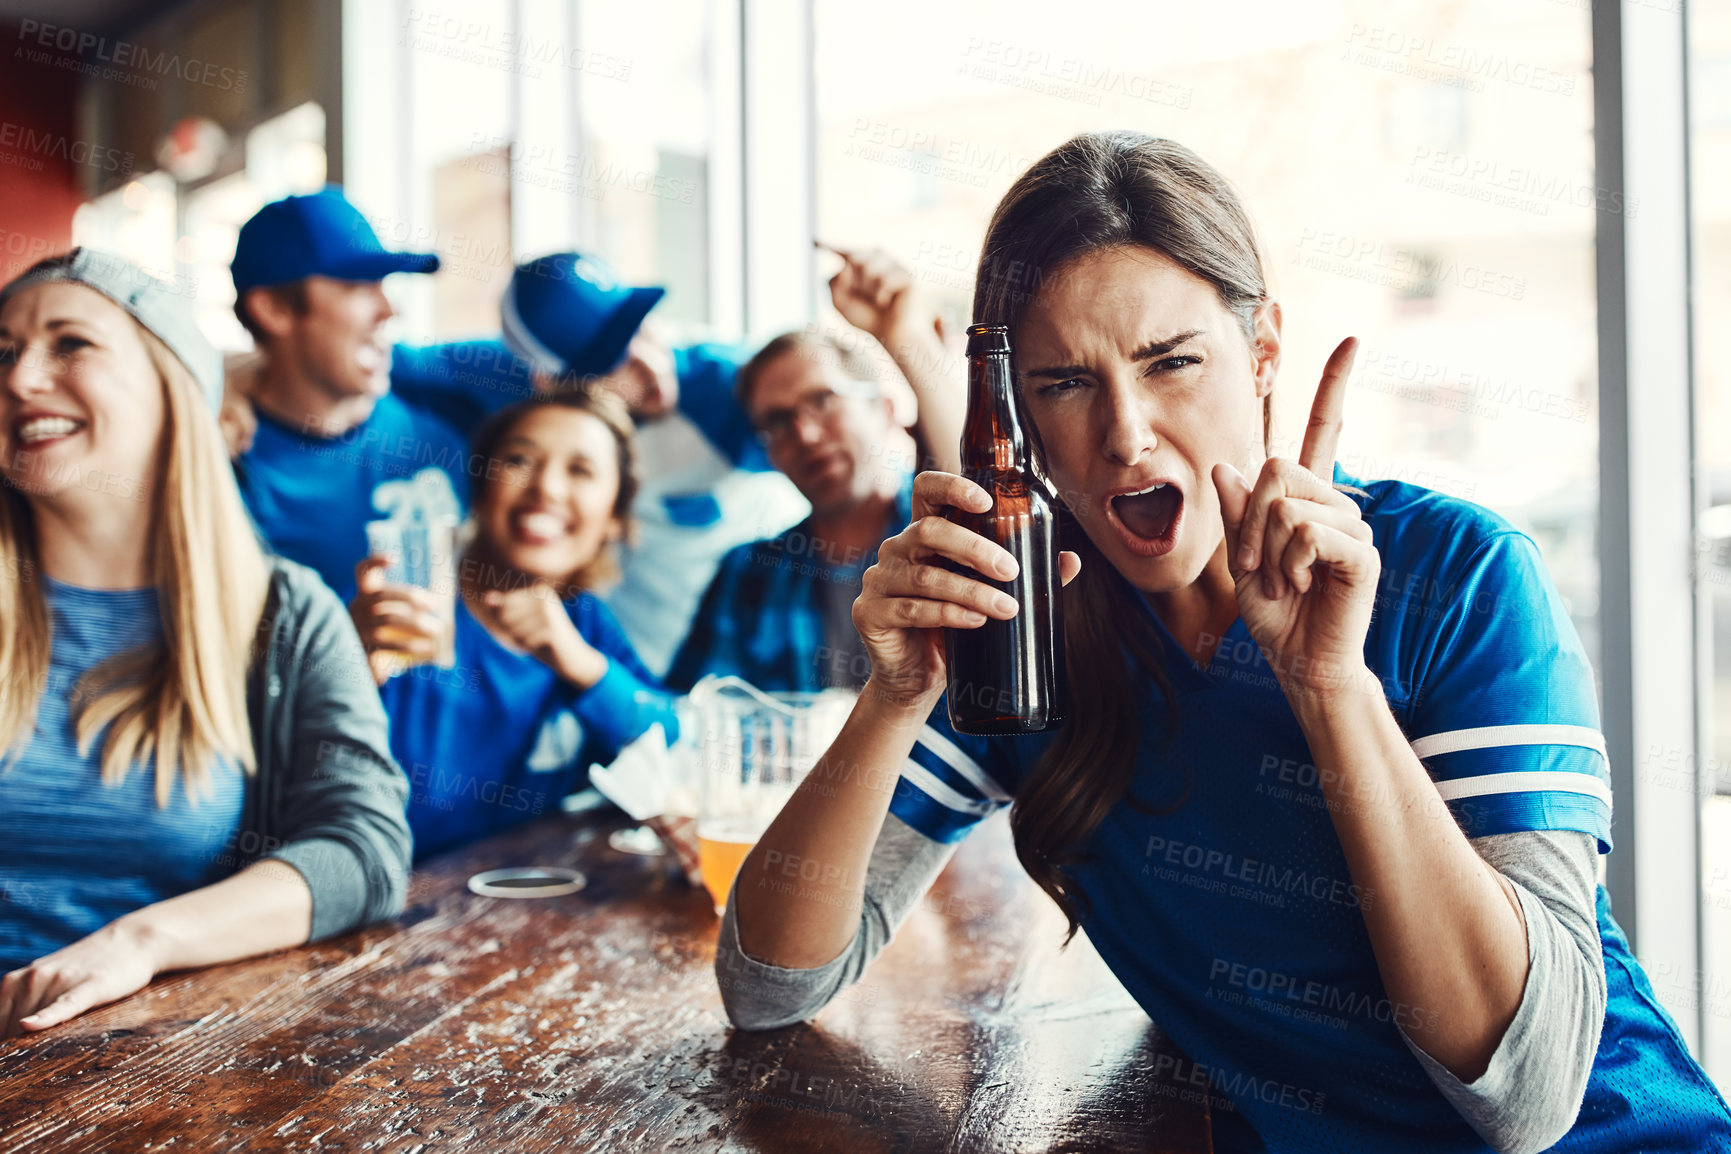 Buy stock photo Portrait of a woman holding up one finger while watching a sports game with friends at a bar